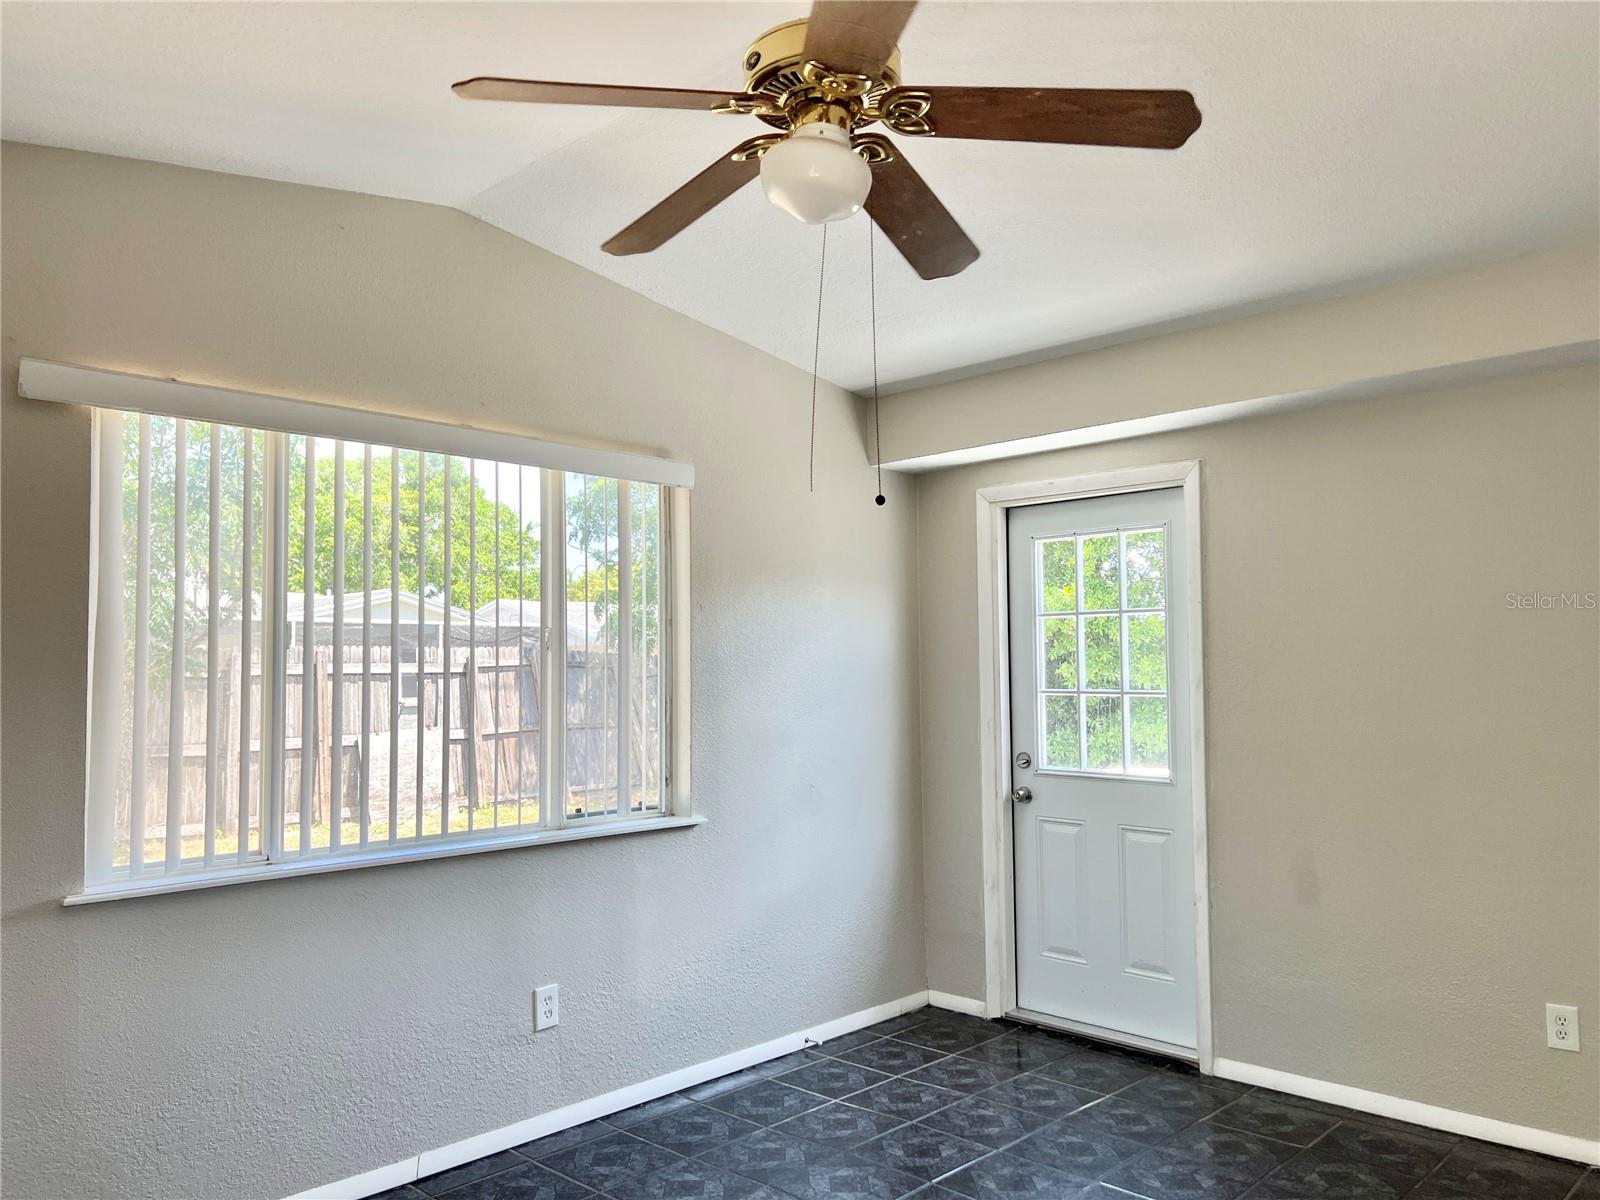 Family Room - Ceramic Tile Floors, Vaulted Ceilings and Ceiling Fan